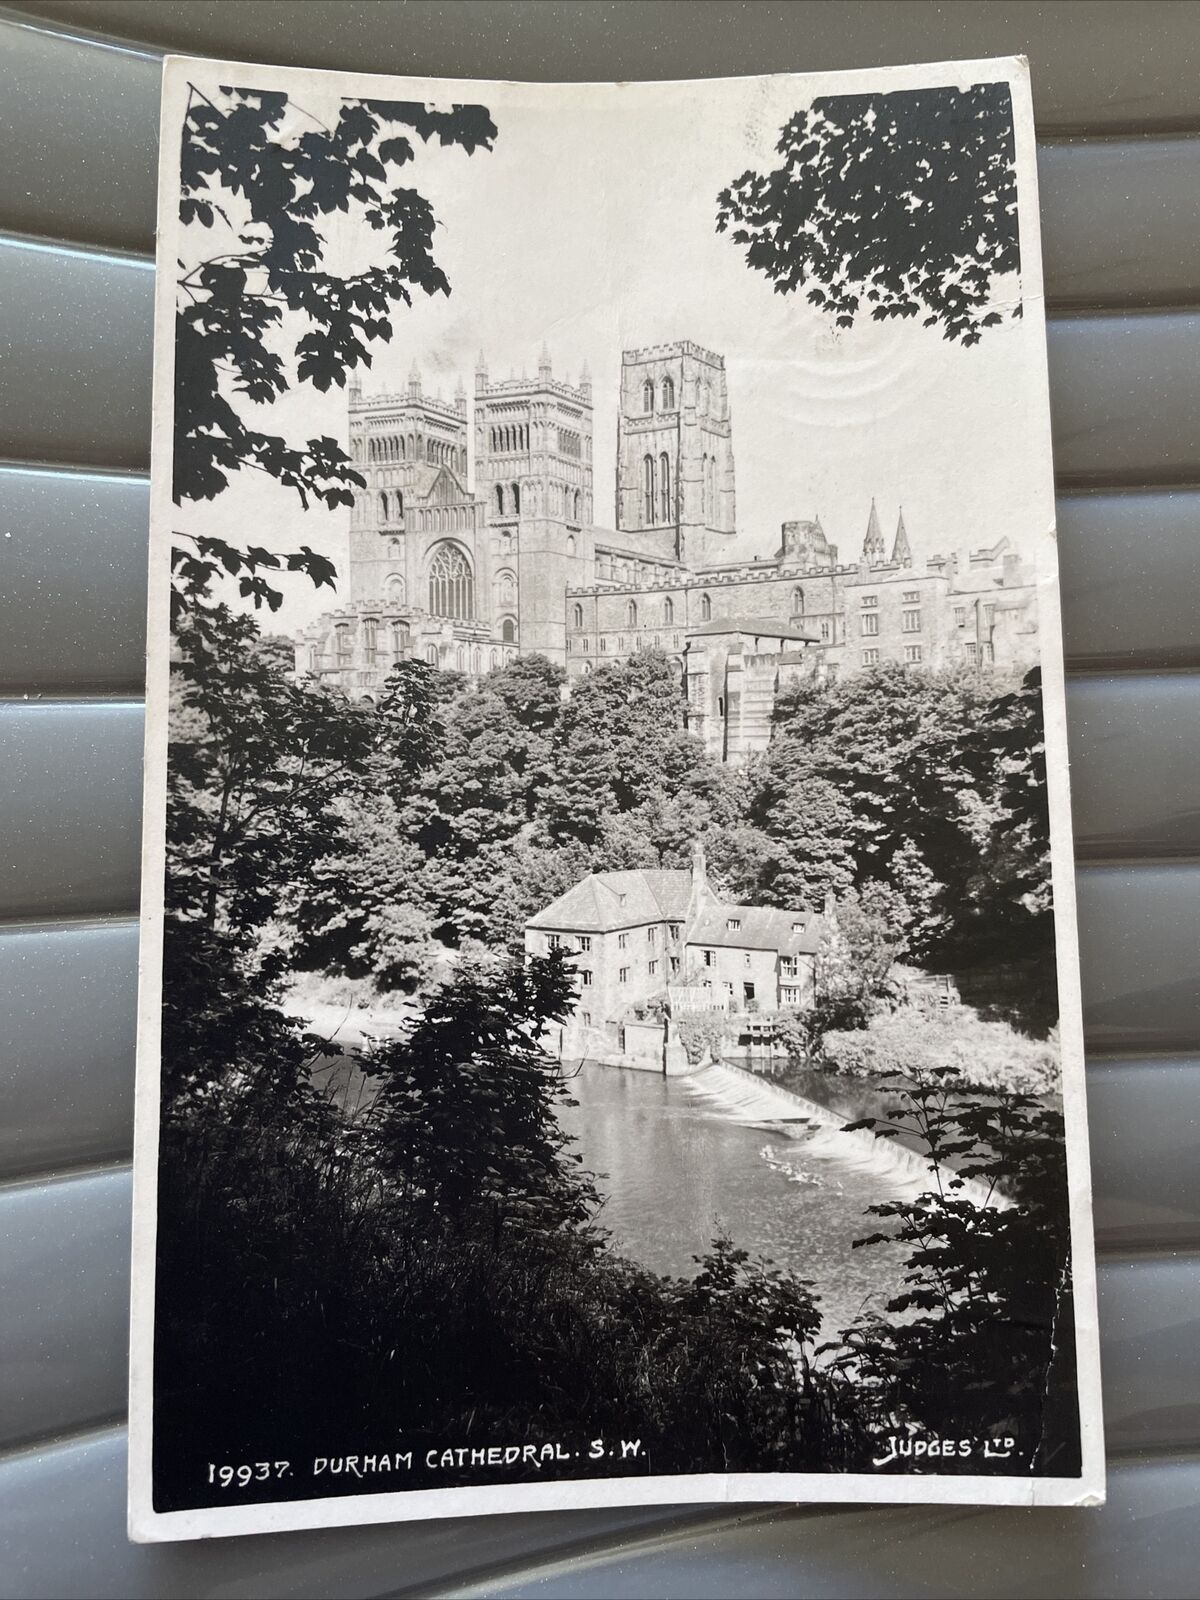 House Clearance - Judges Ltd Service, No 19937, Durham Cathedral. S.W